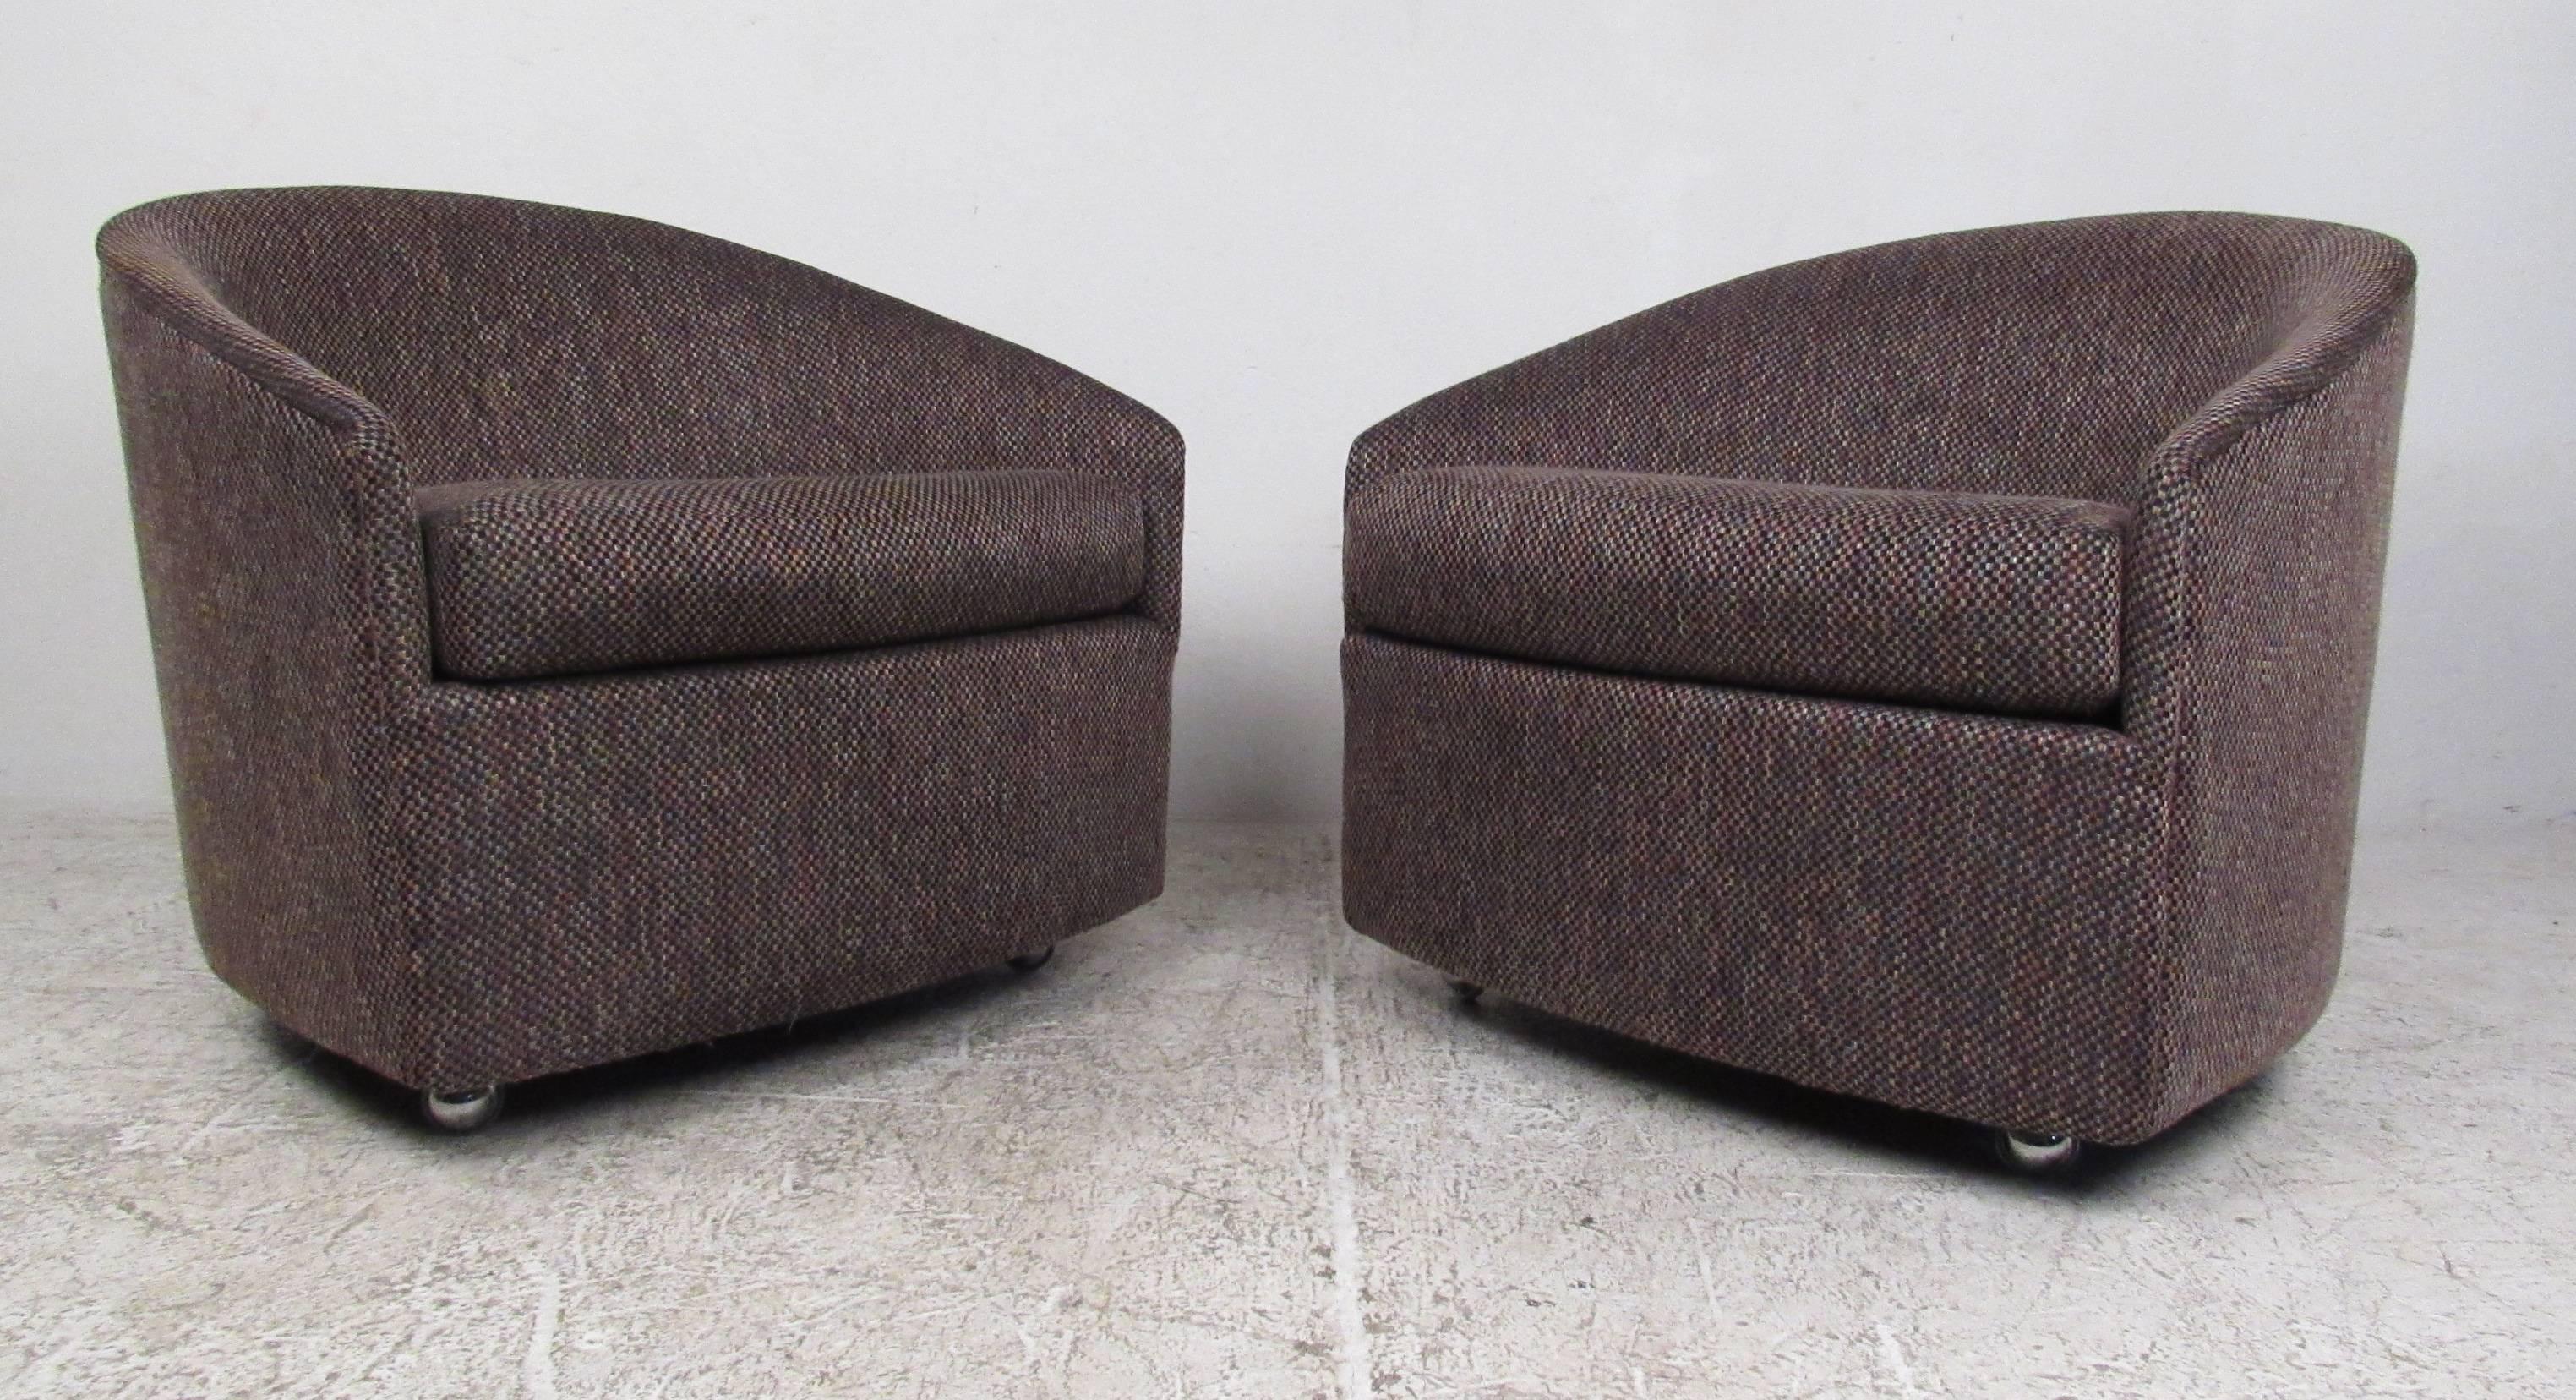 American Pair of Stylish Mid-Century Modern Barrel Back Lounge Chairs after Milo Baughman